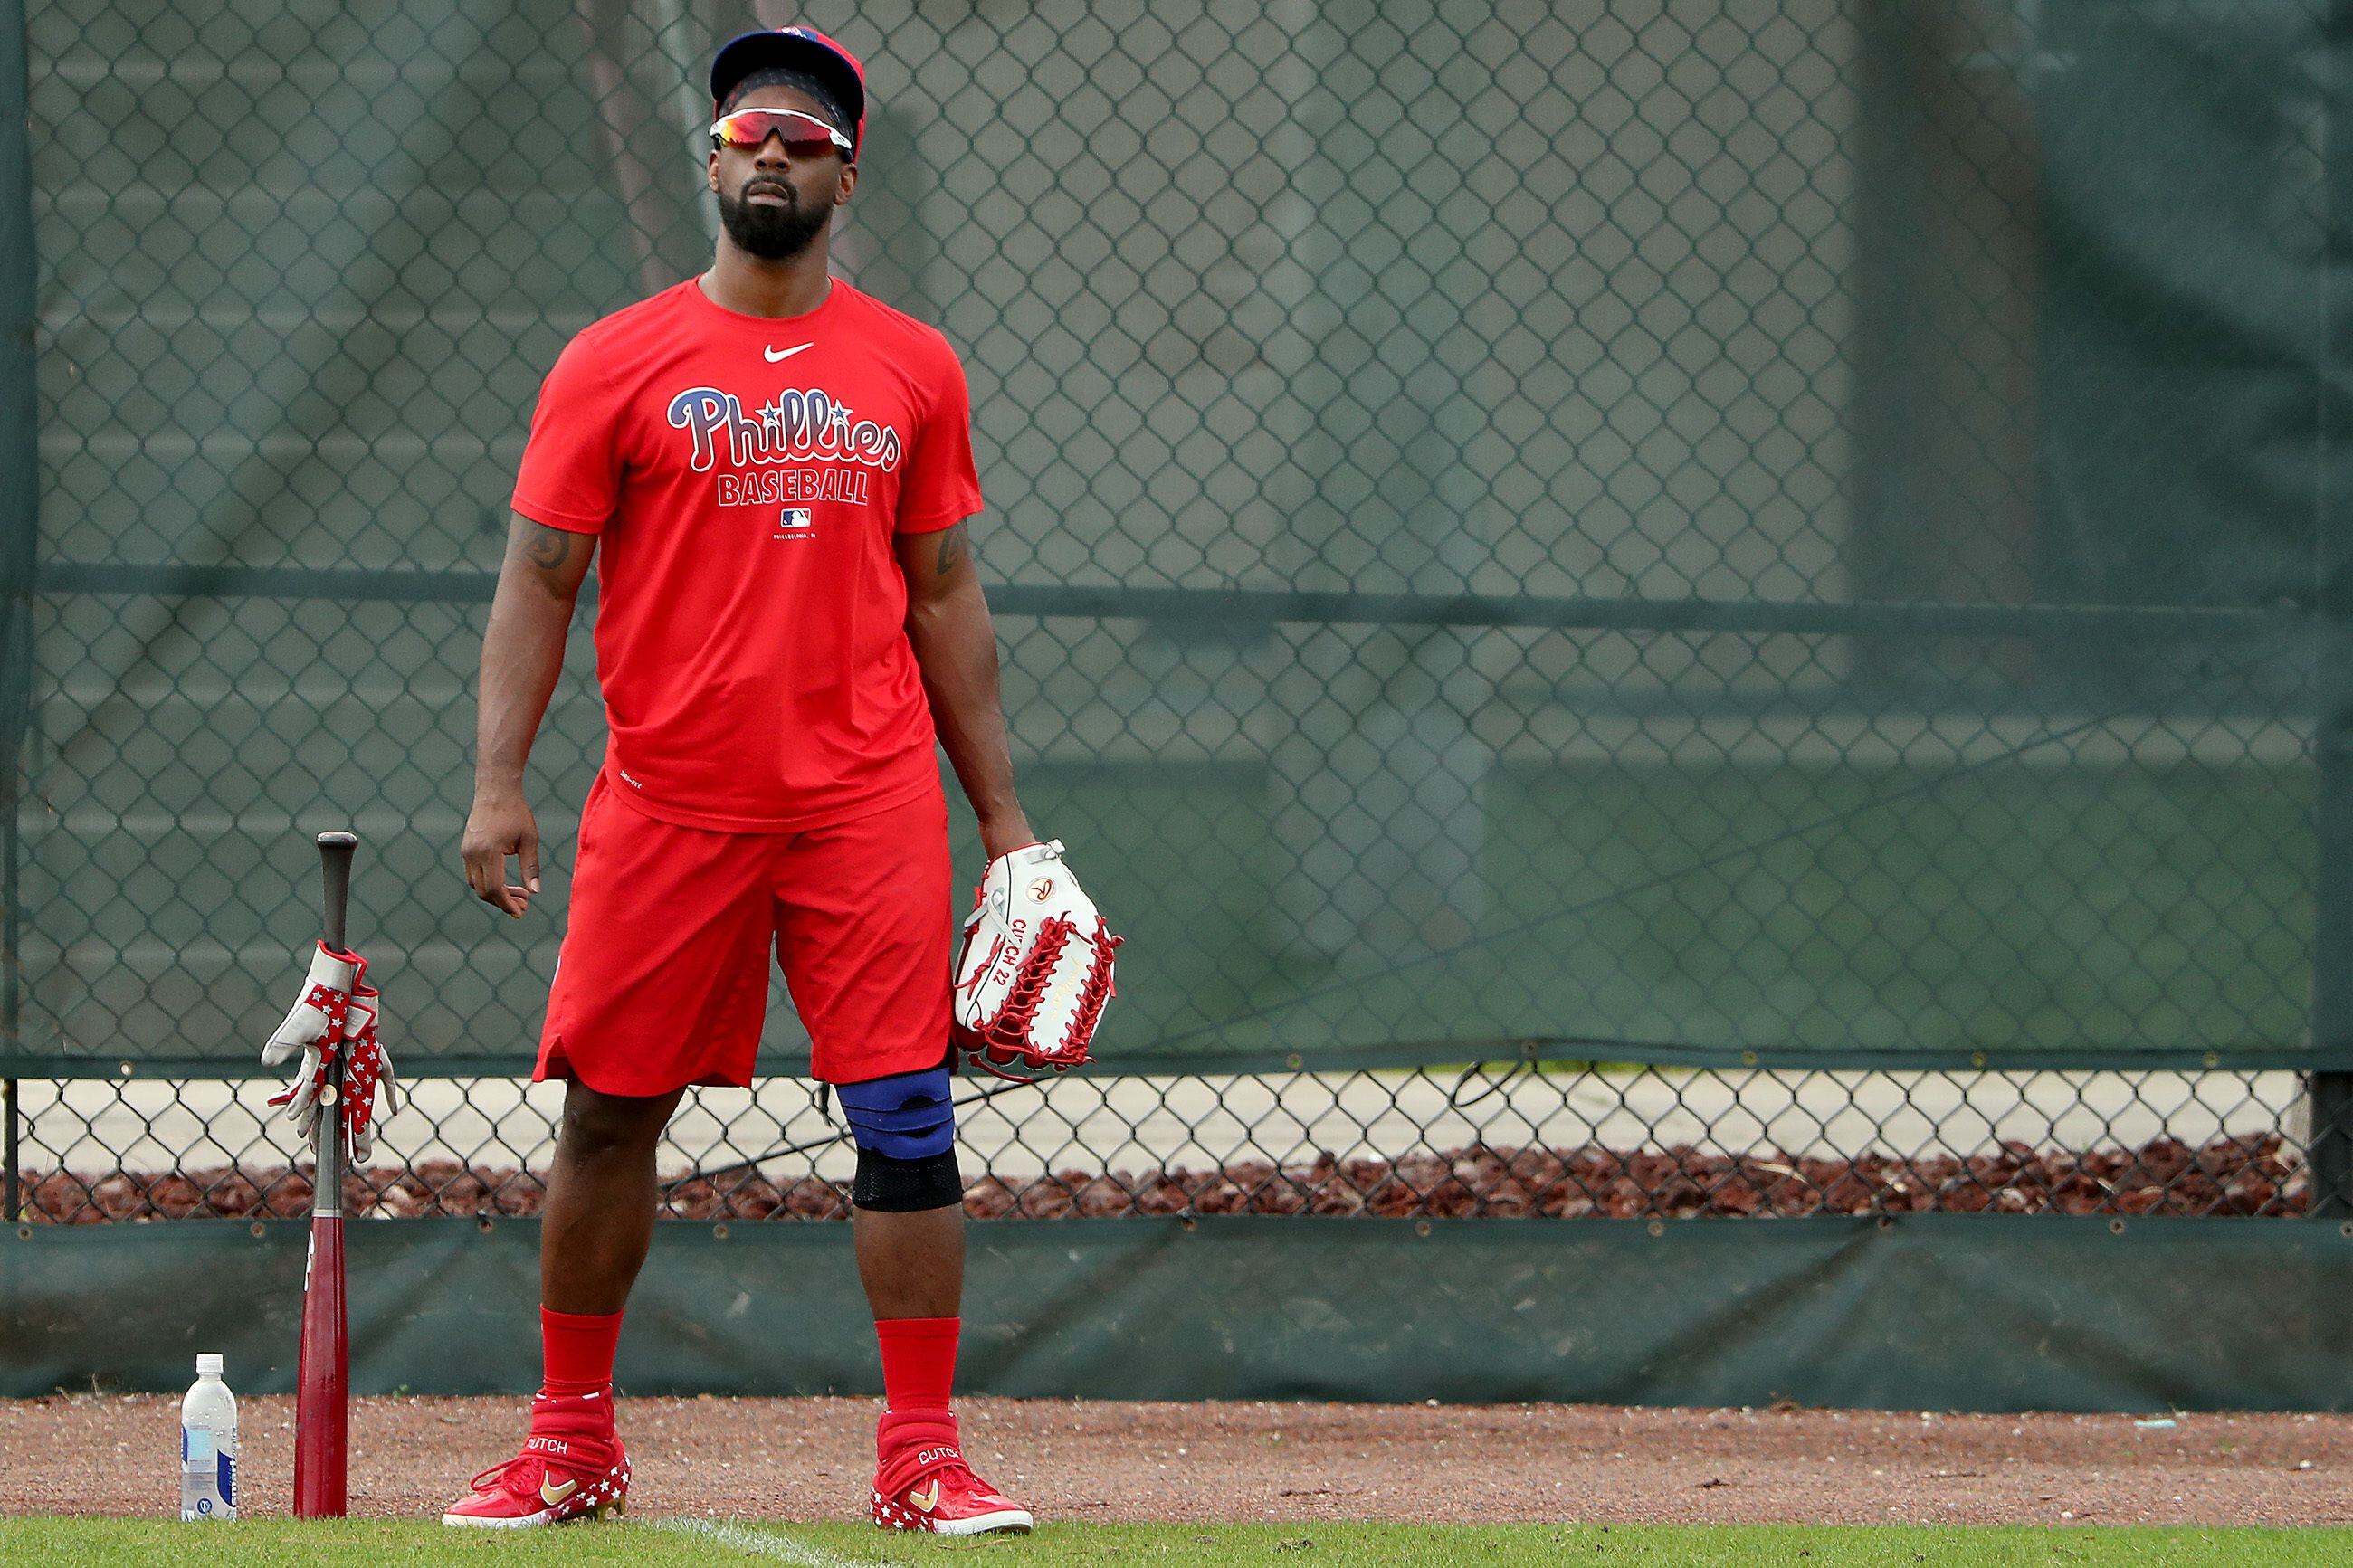 Philadelphia Phillies' Andrew McCutchen suffers knee injury trying to avoid  tag, asks for prayers